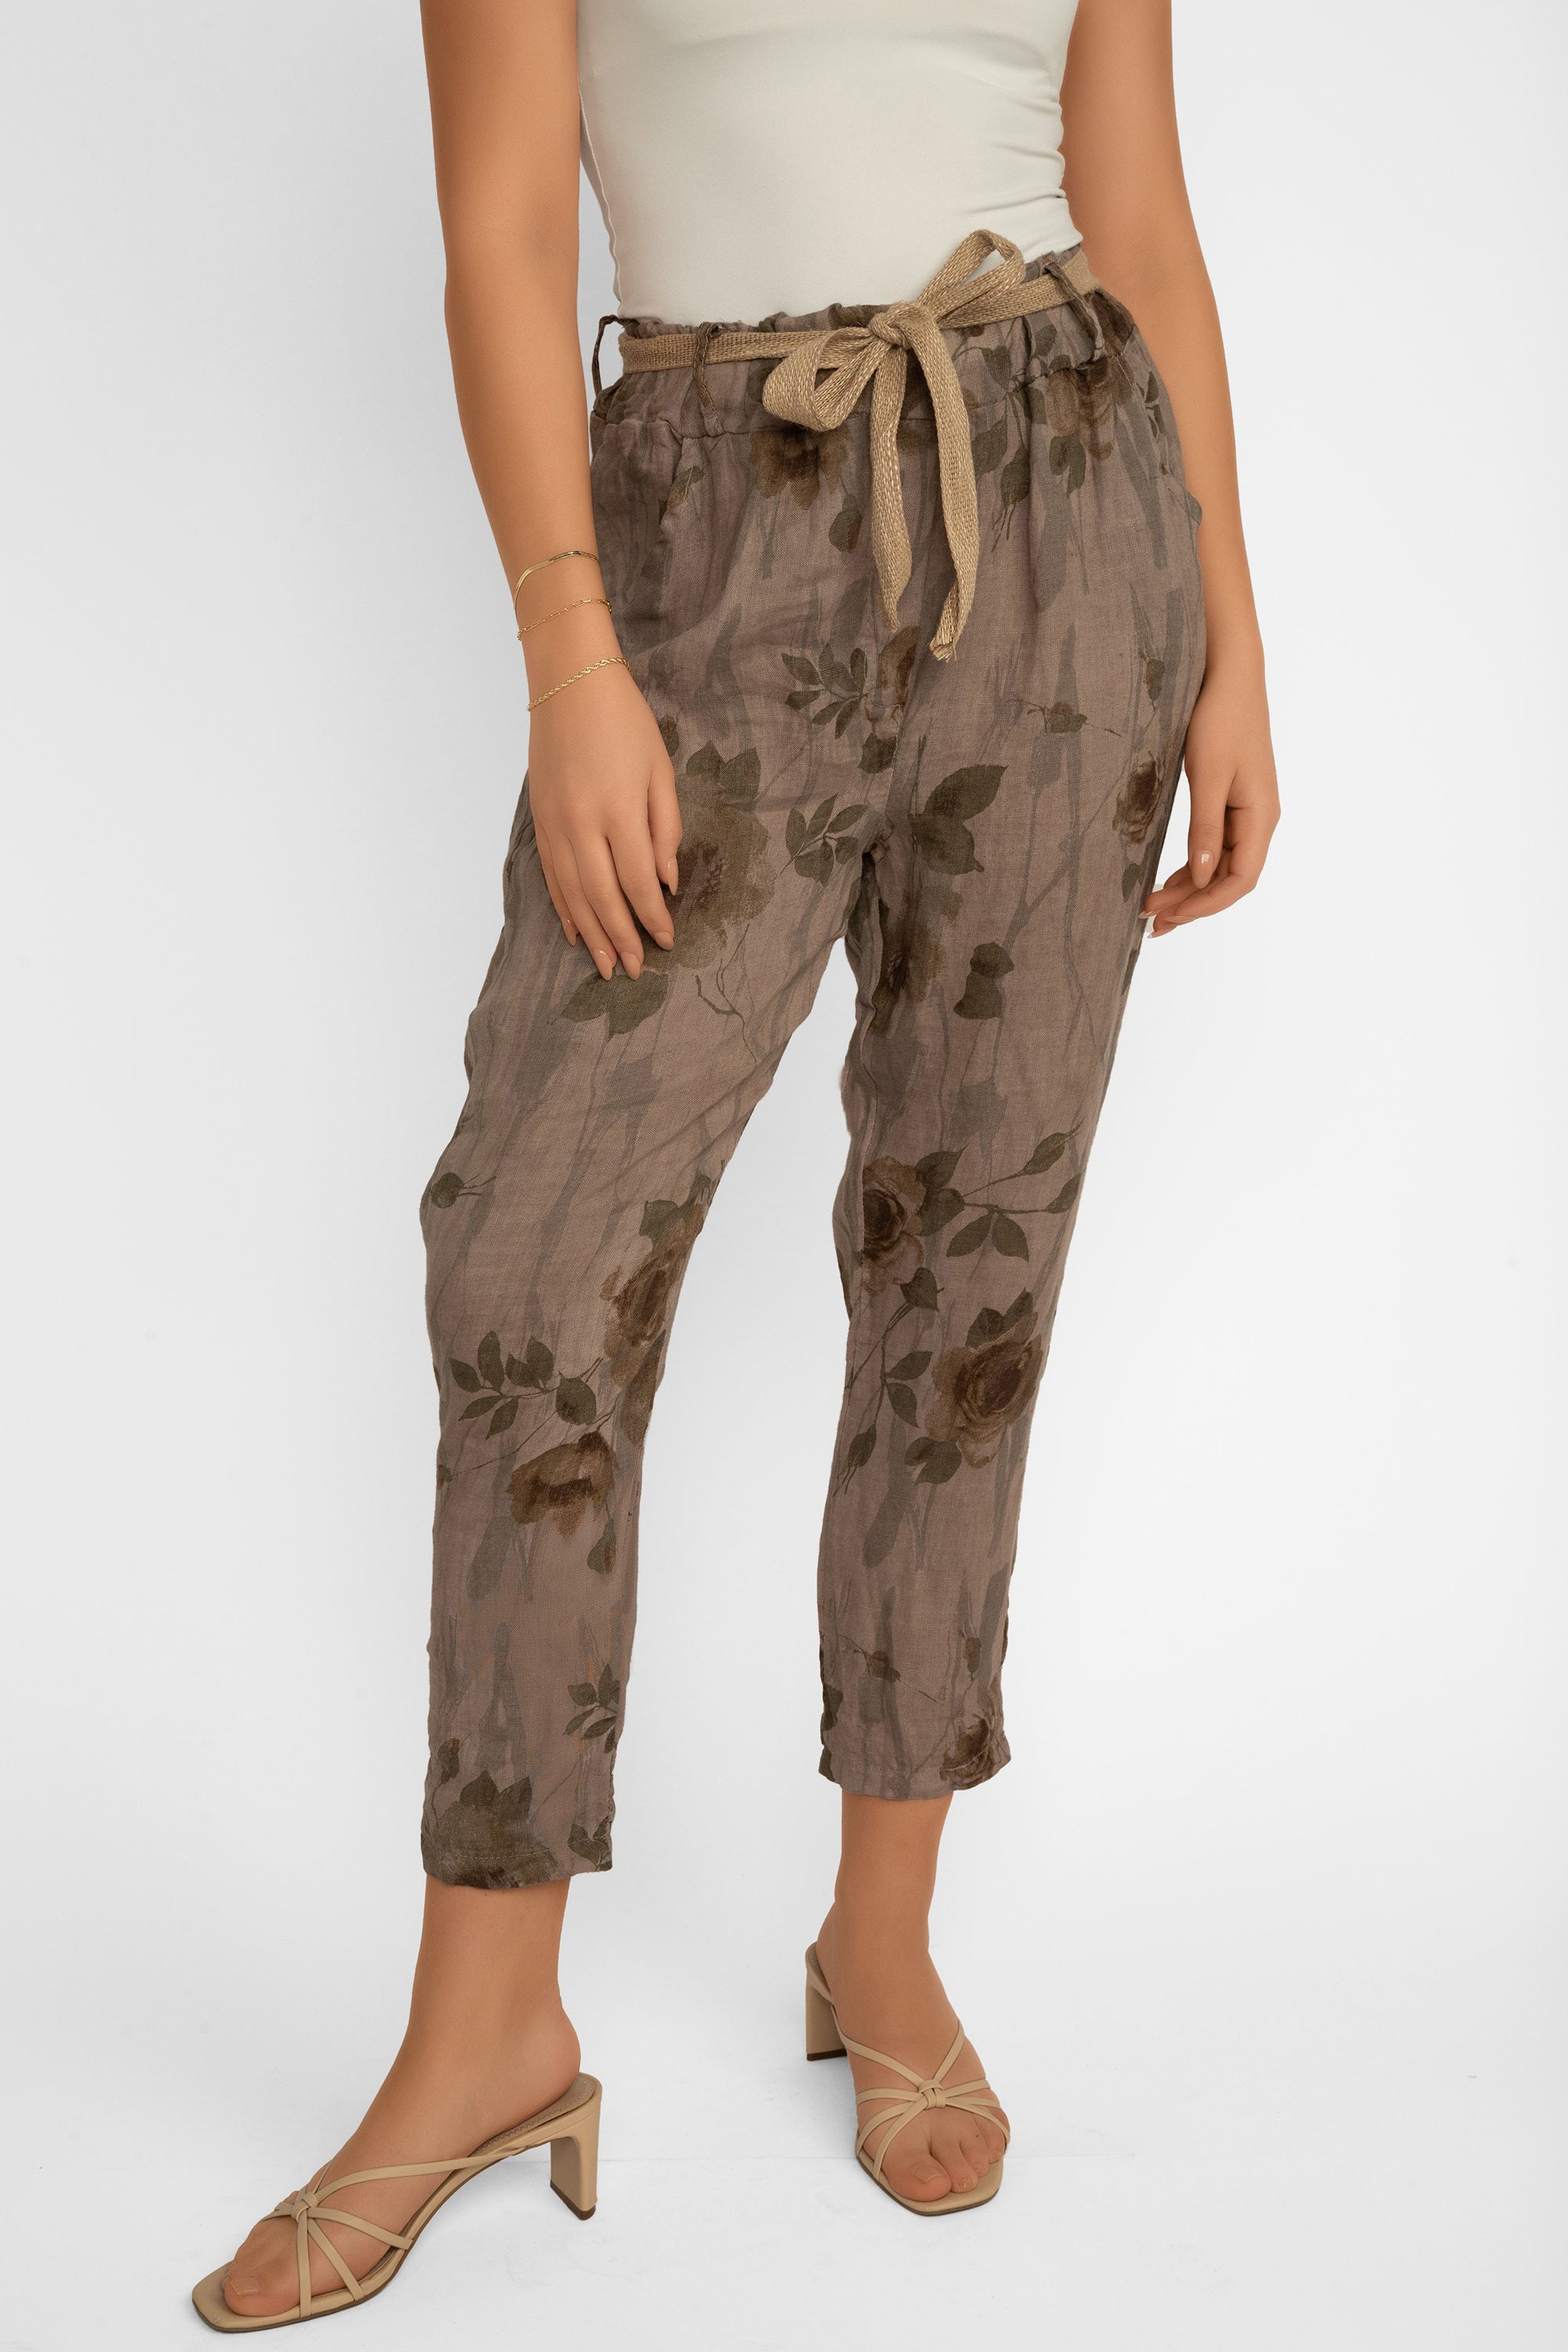 Elissia (CM20847) Women's Slim Fit Cropped Floral Print Linen Pants With Belt in Brown